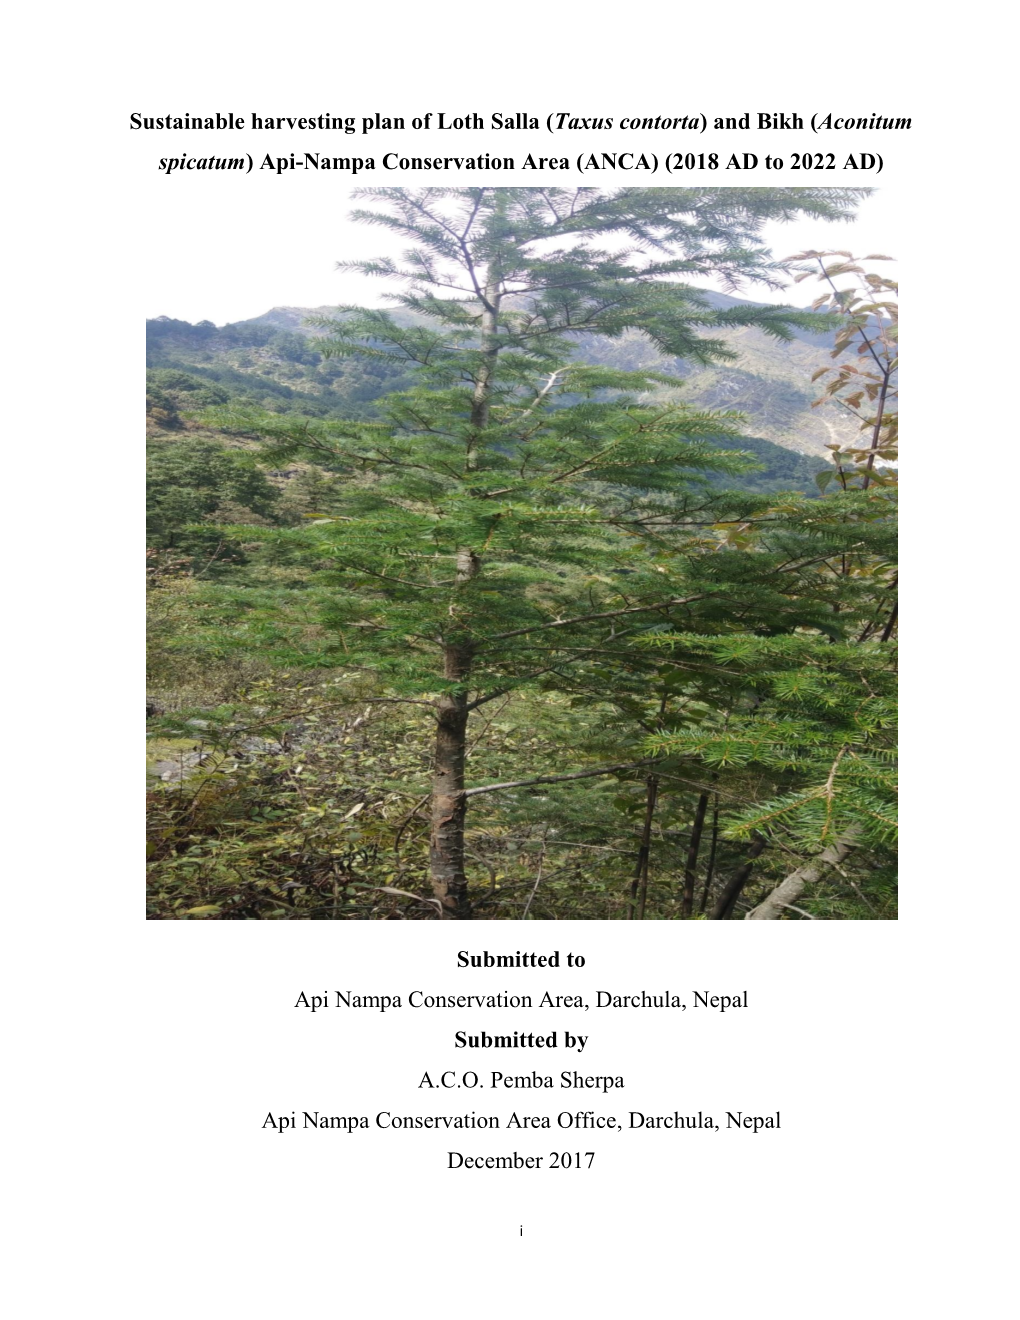 Sustainable Harvesting Plan of Loth Salla (Taxus Contorta) and Bikh (Aconitum Spicatum) Api-Nampa Conservation Area (ANCA) (2018 AD to 2022 AD)